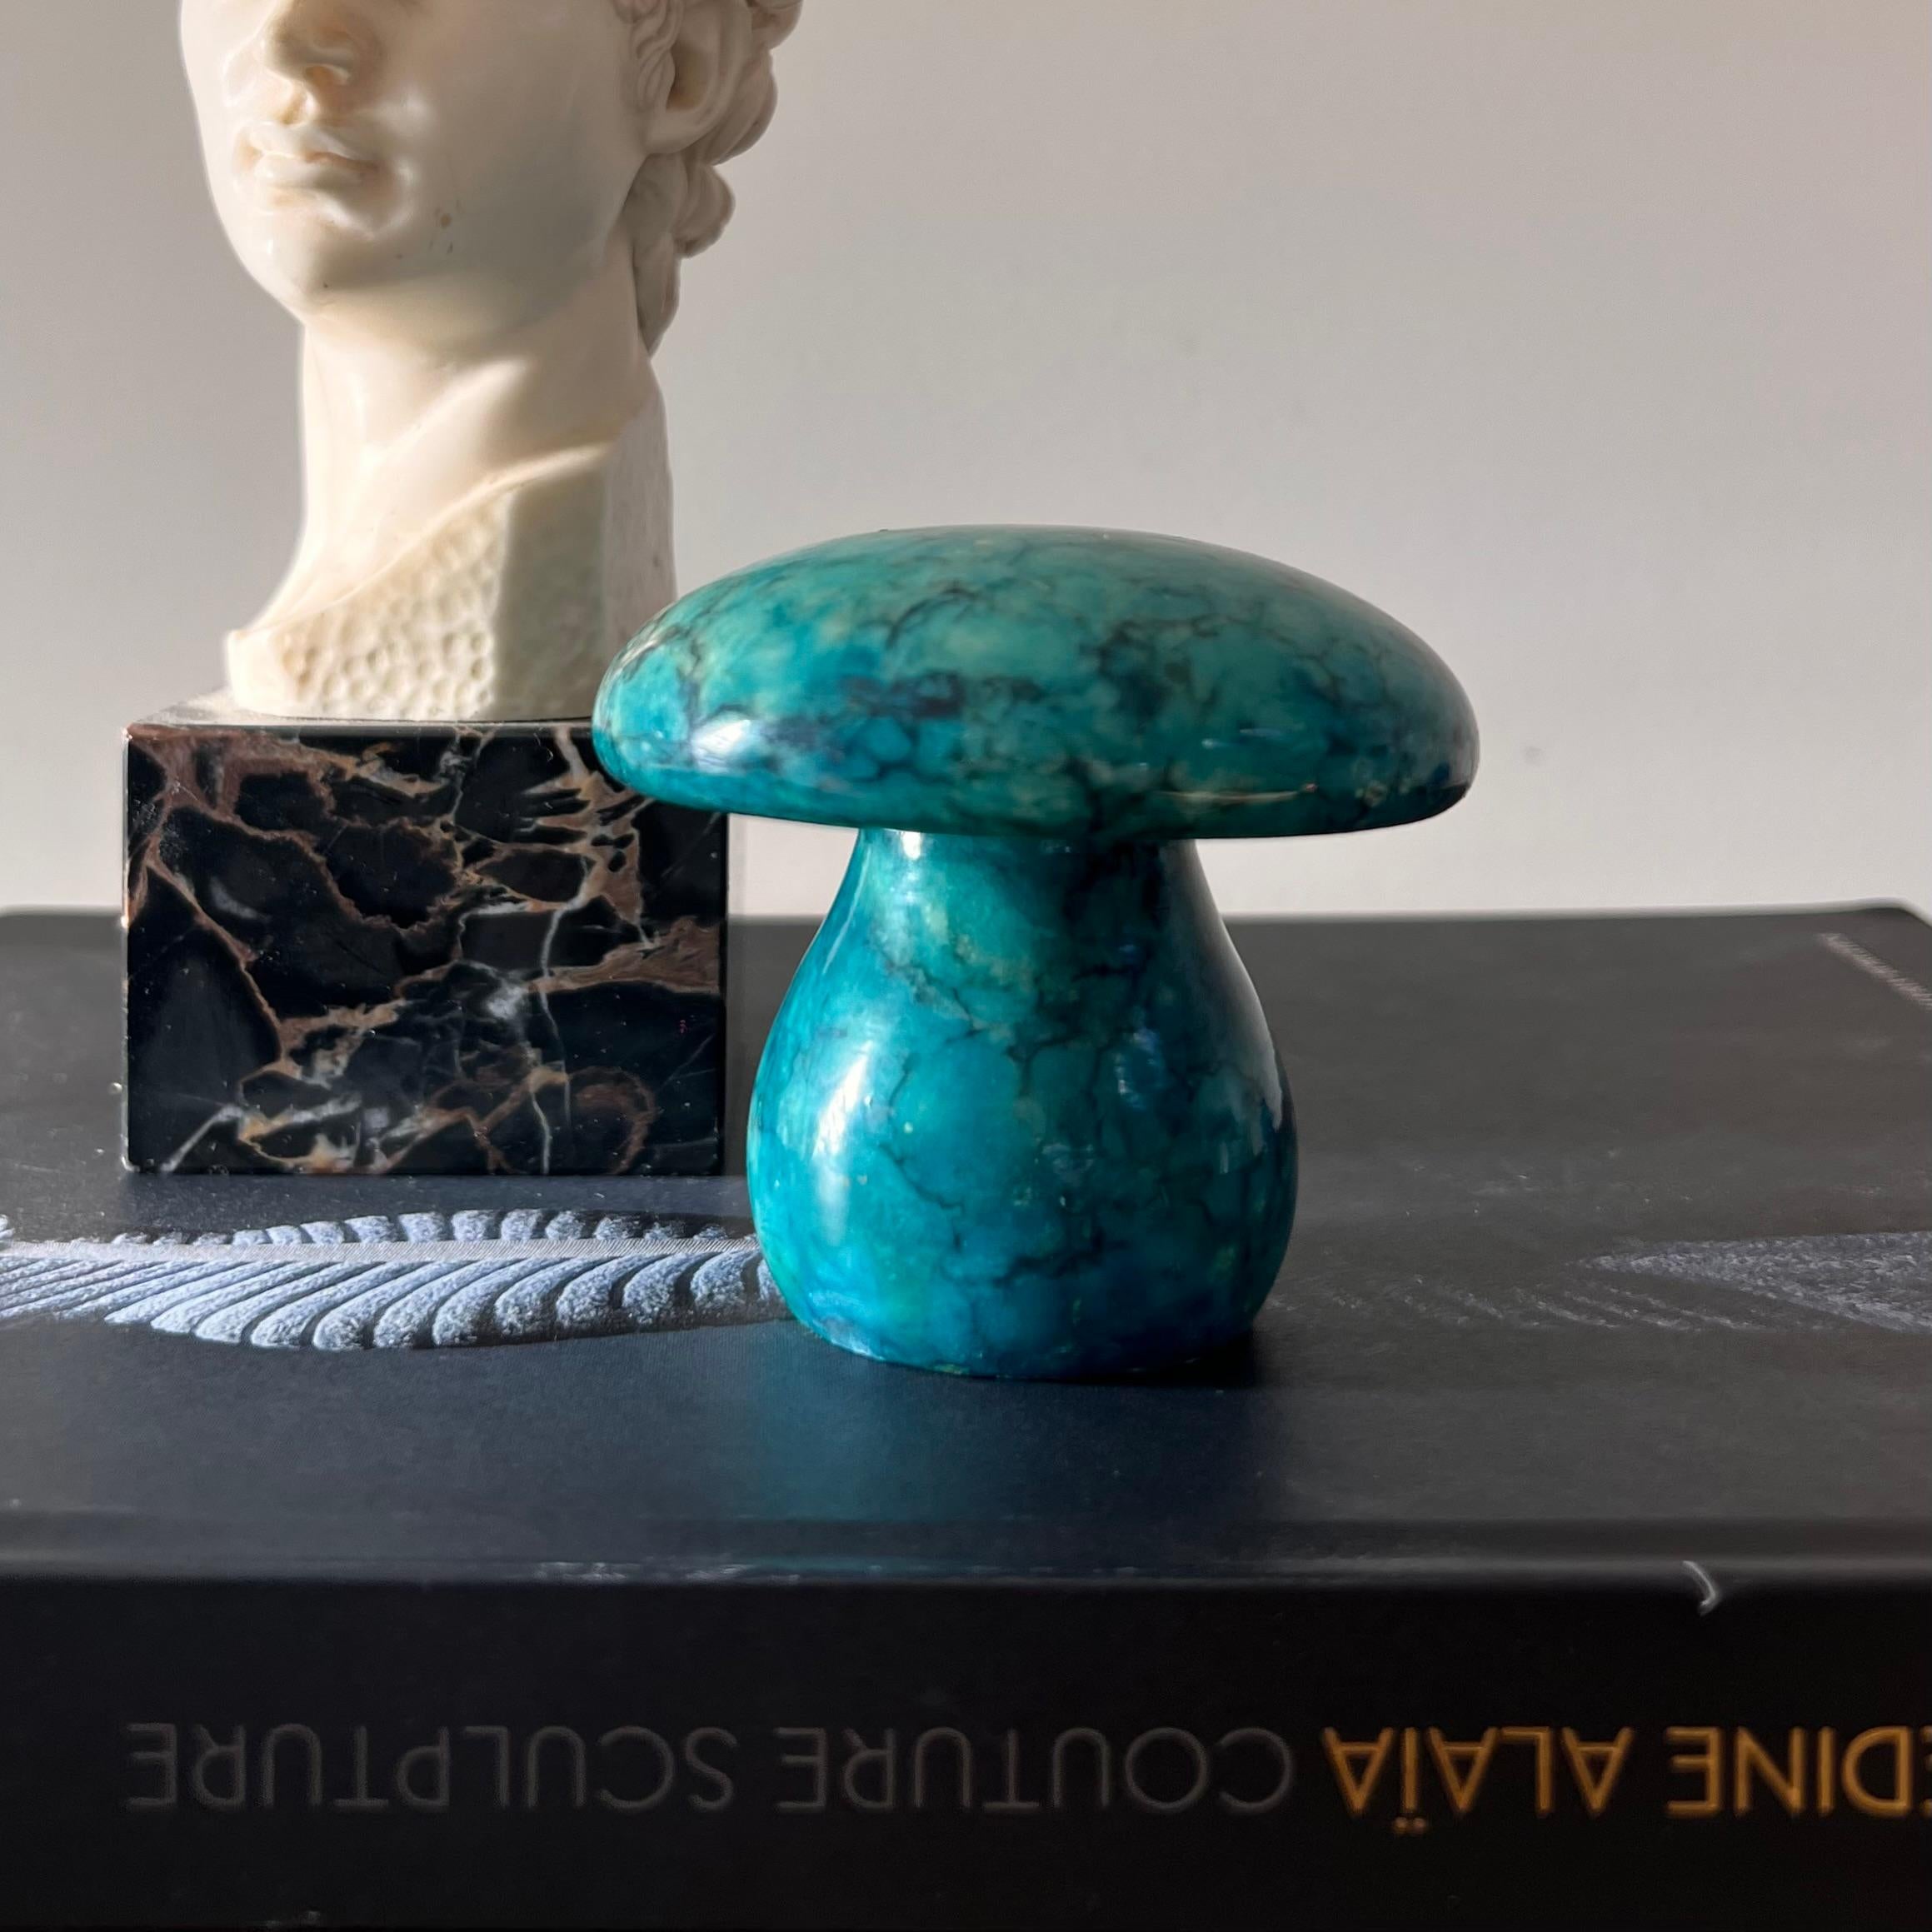 A vintage Italian marble alabaster mushroom in brilliant blue, circa 1960s. Hand-carved. Fabulous as an objet d’art or a paperweight - have it your way. Minor signs of age but no glaring flaws. Pick up in central west Los Angeles or worldwide